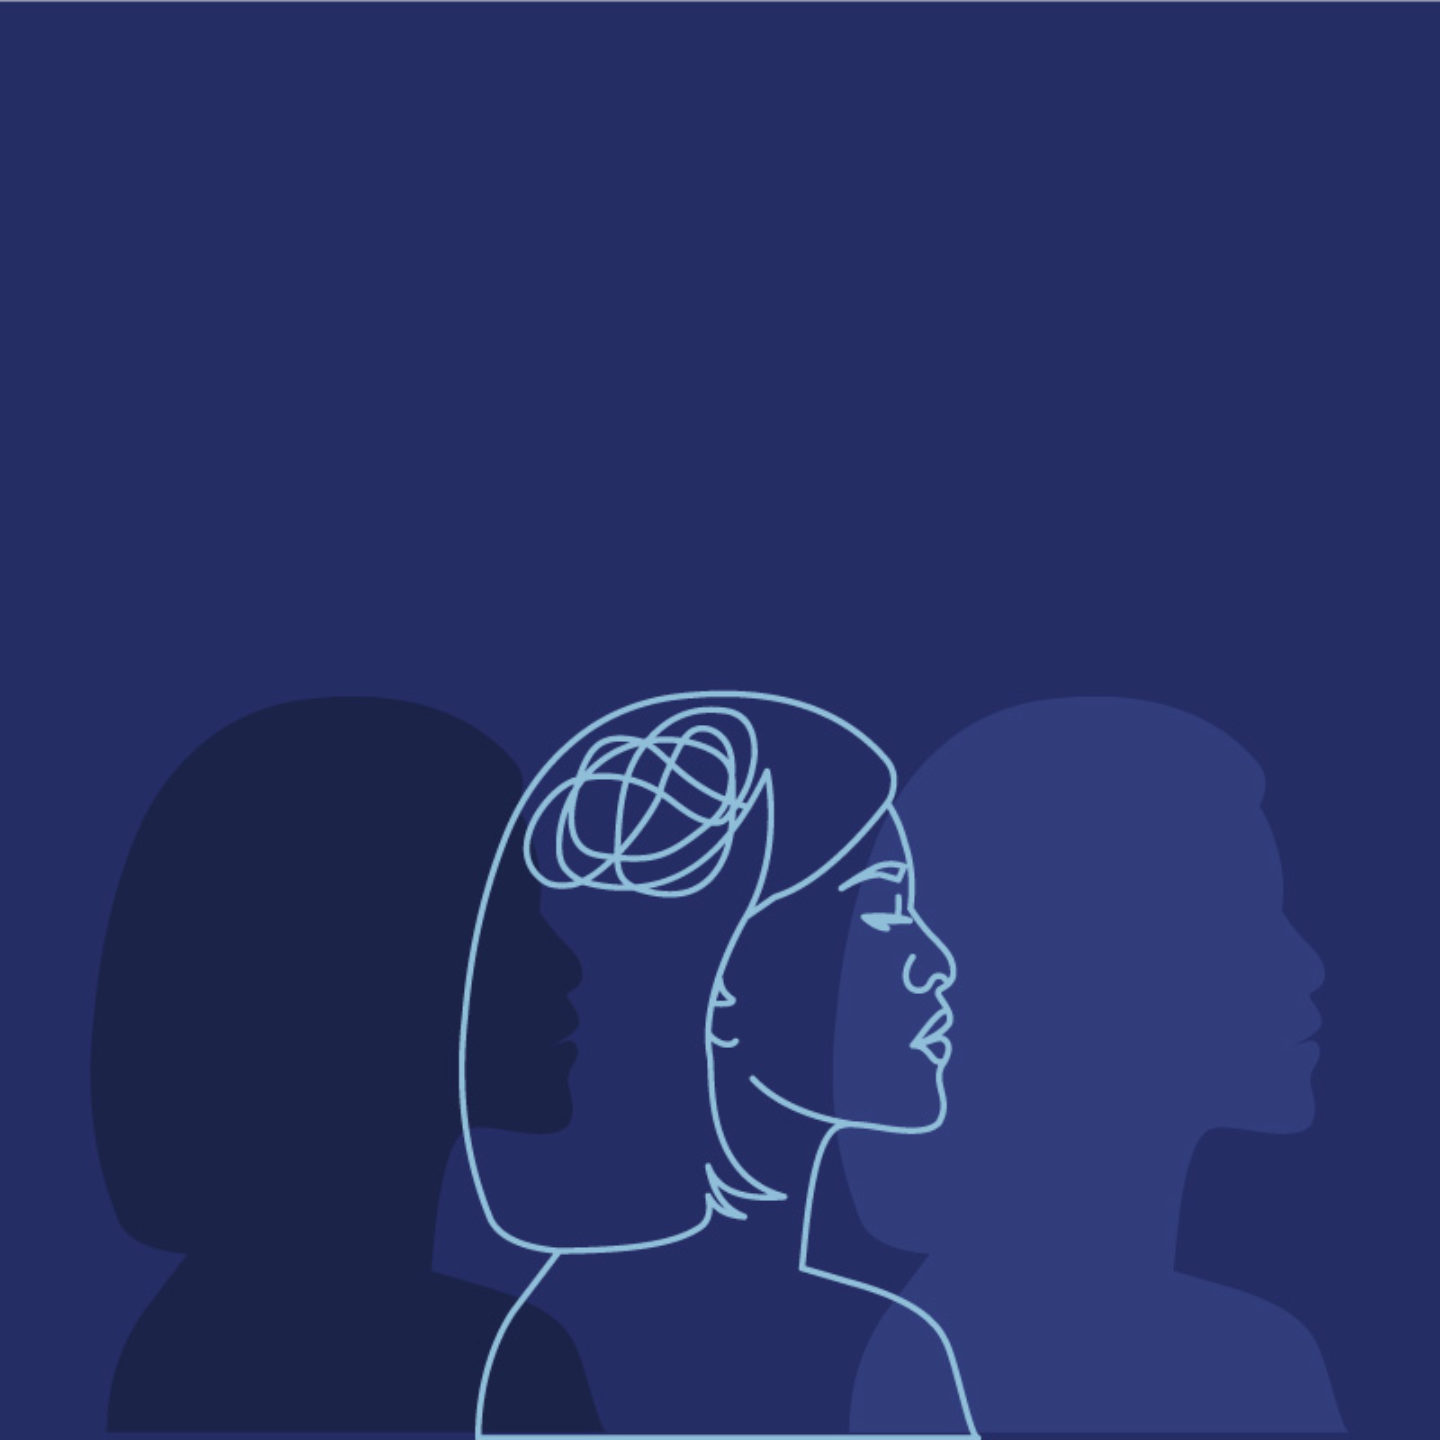 Outlined side profile view of a woman with short hair with a scribbled design in her head to signify mental illness. Next to the outlined design is two solid shapes of her side profile, signifying depression and mood changes